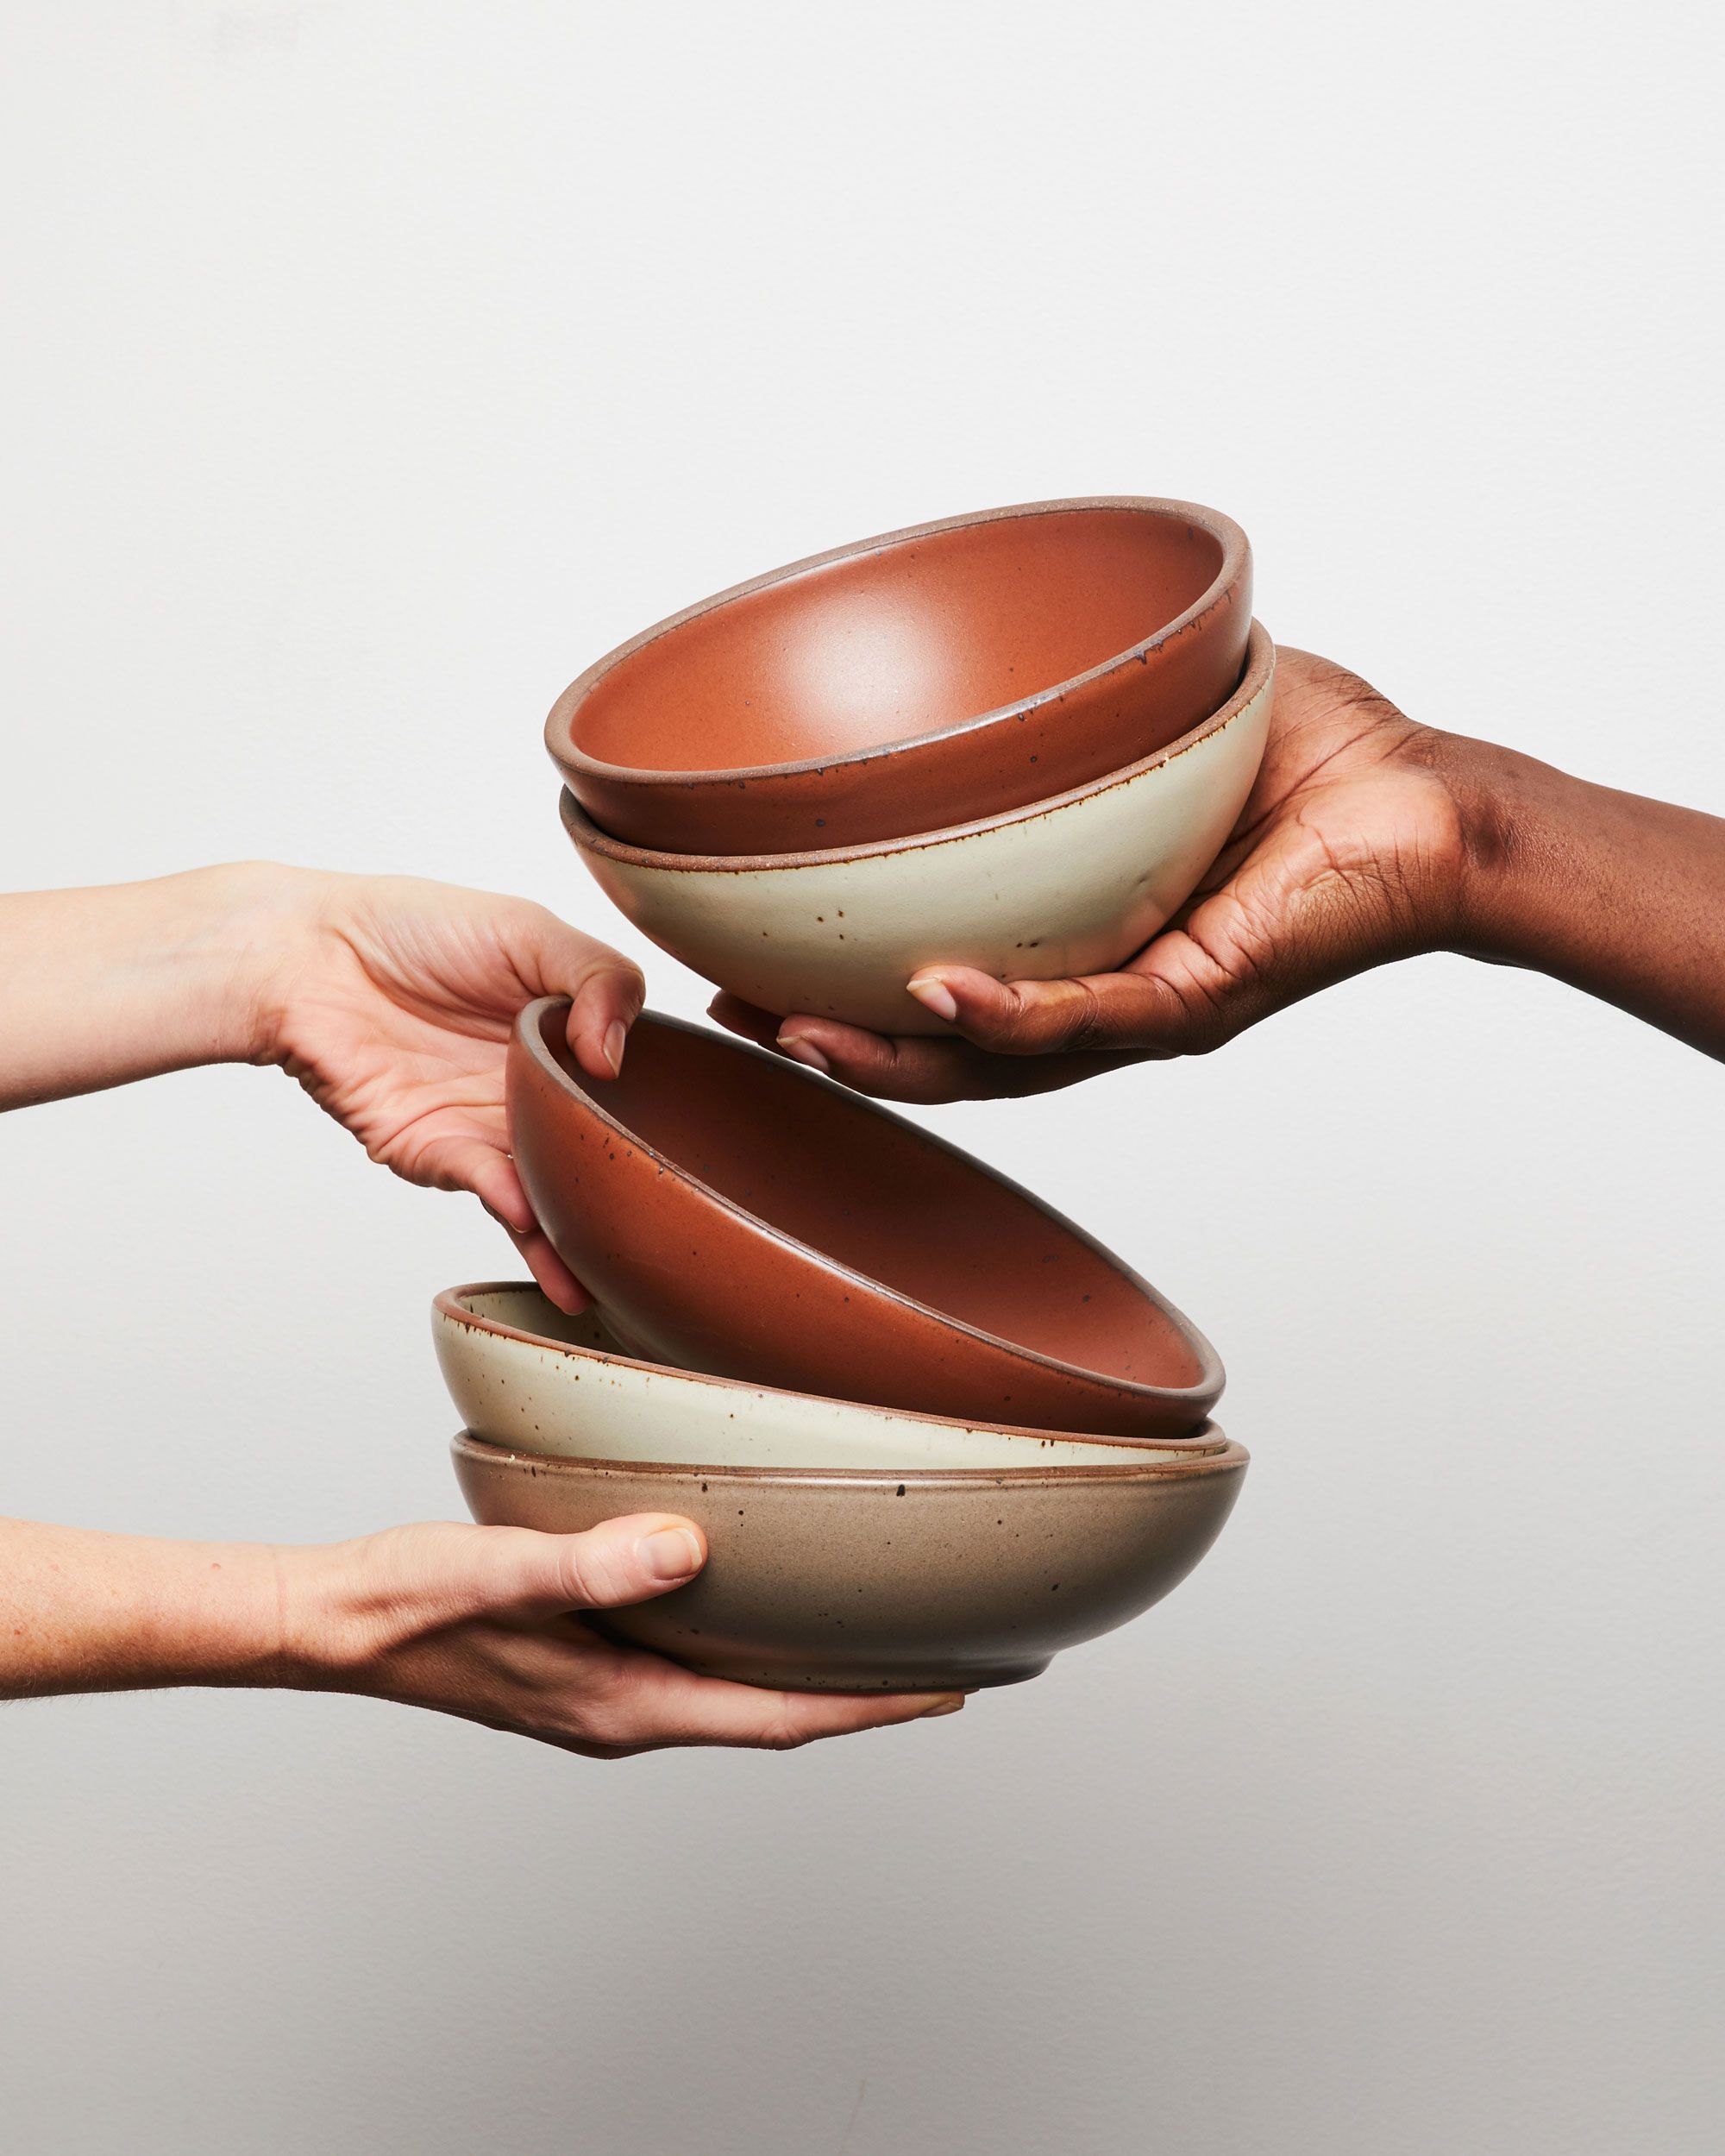 3 hands are holding ceramic bowls in terracotta, cream, and natural colors and exchanging them to one another